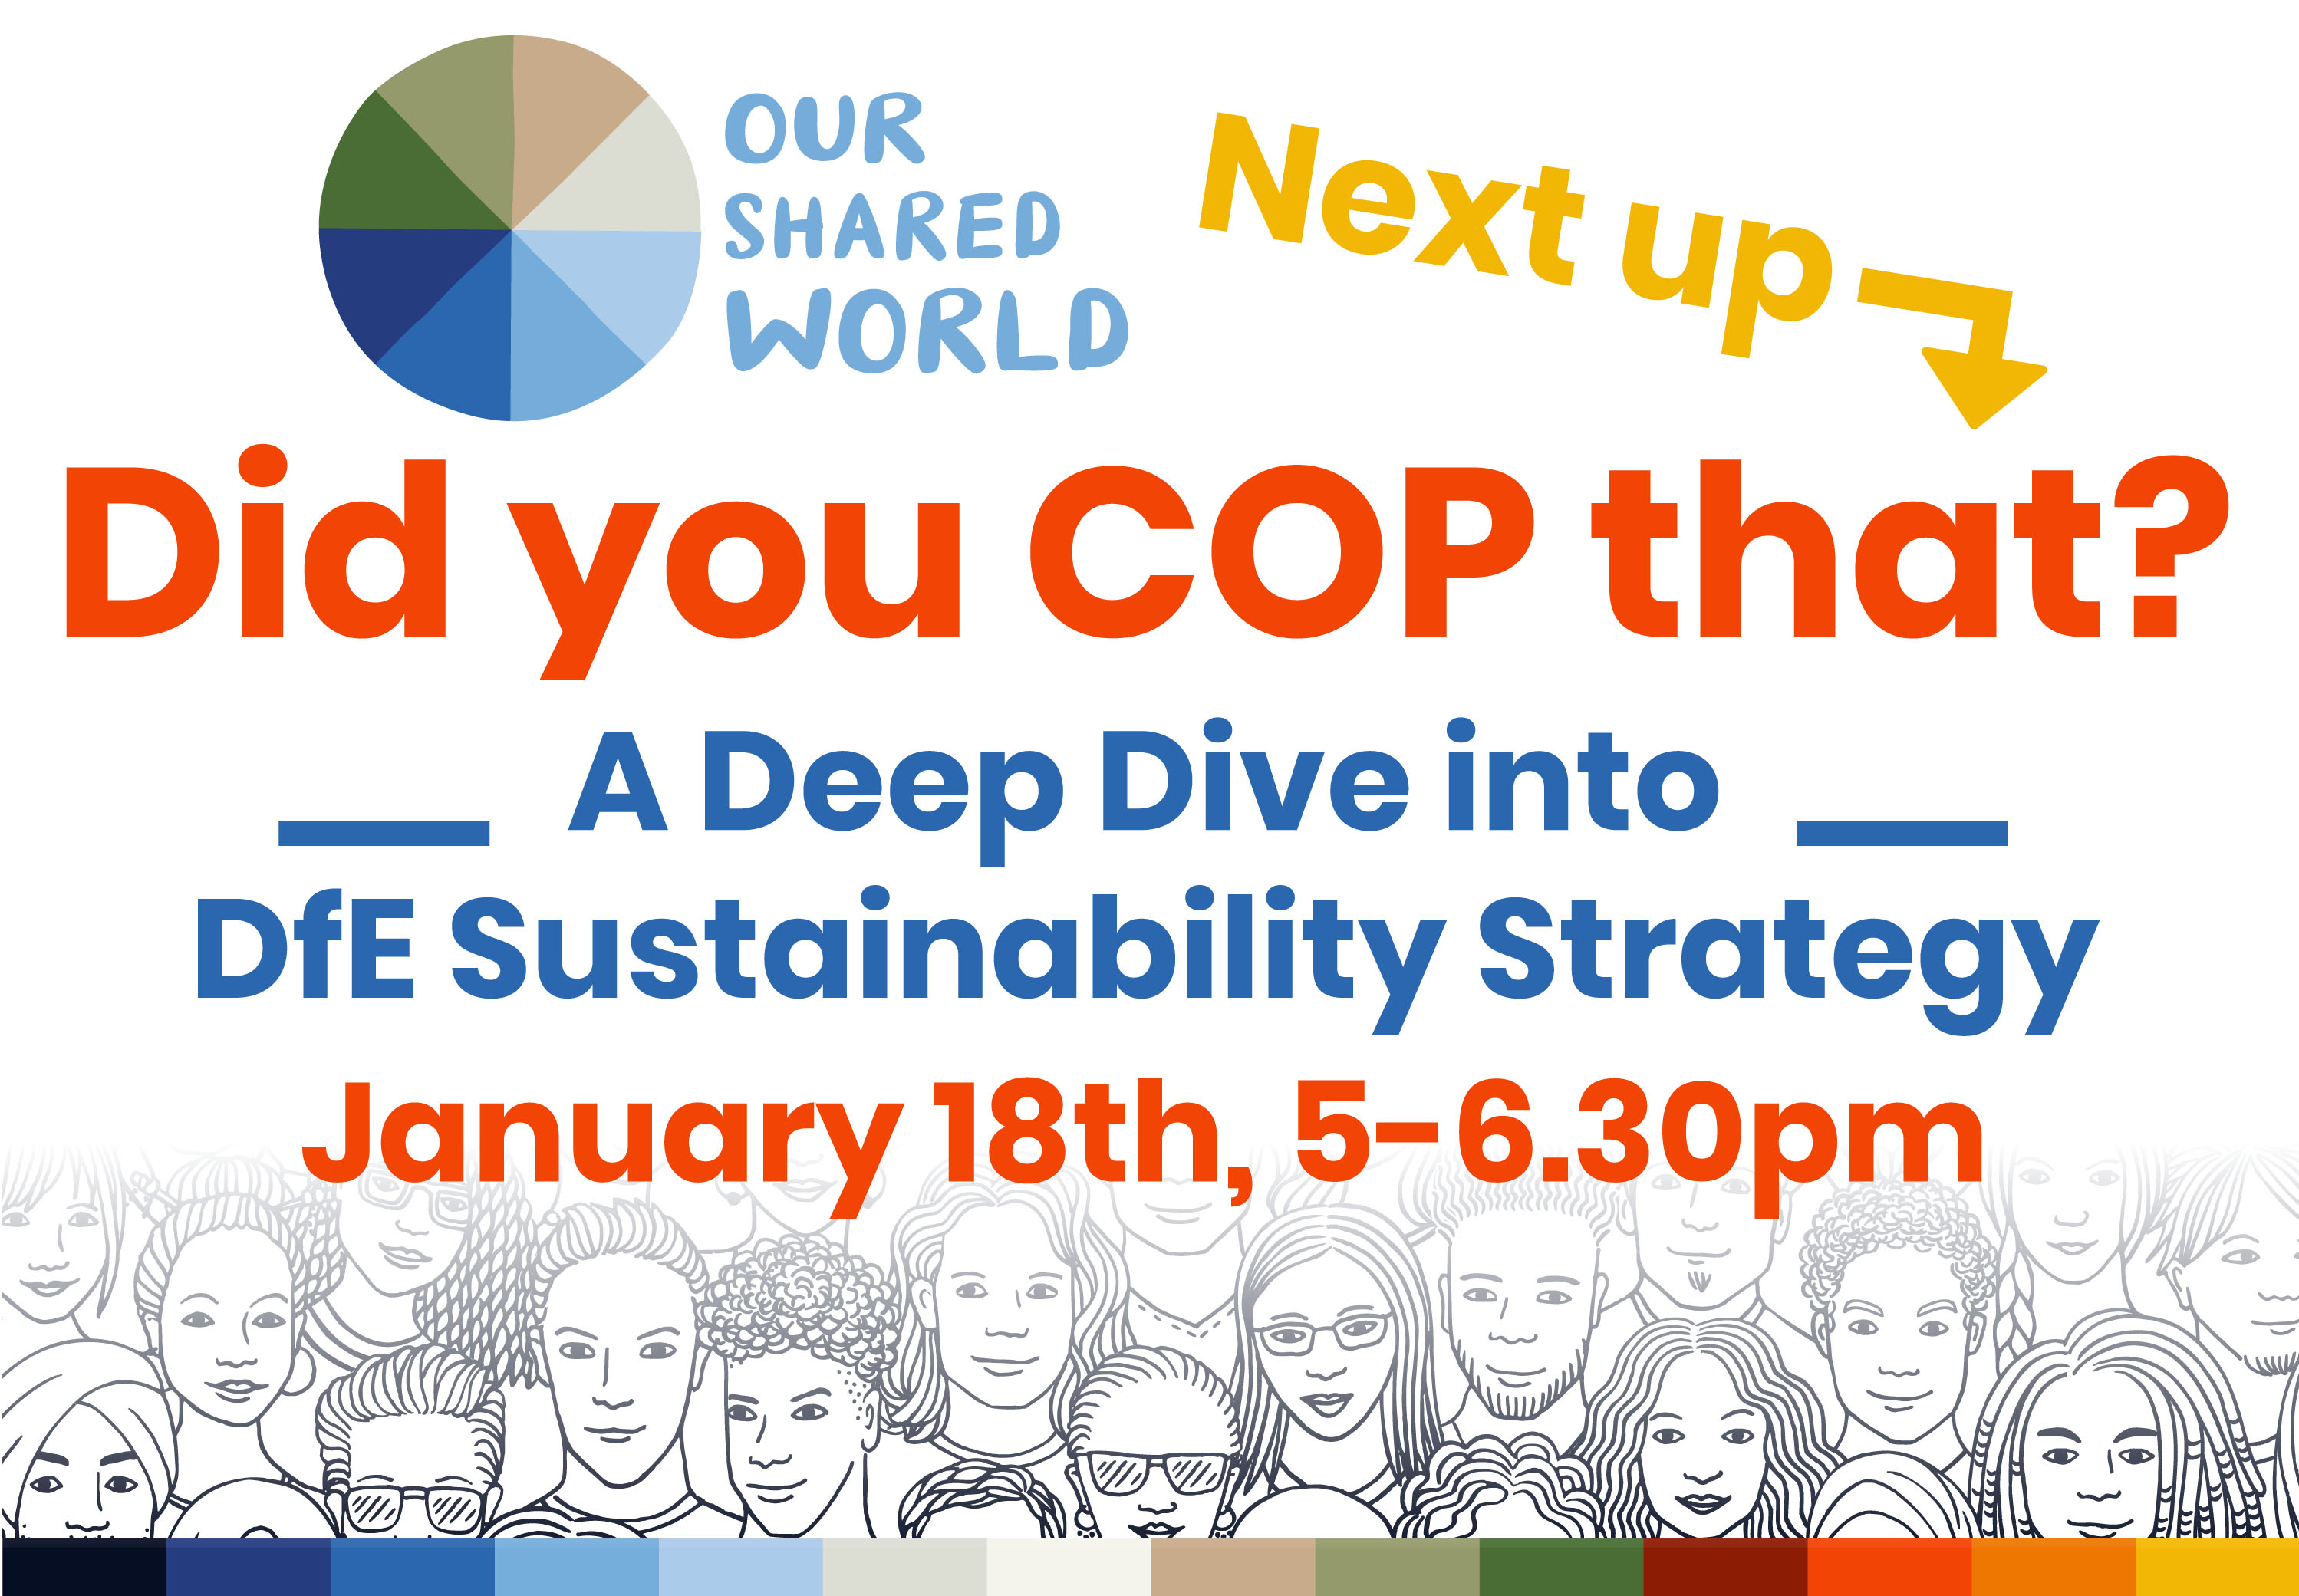 January 18th 5-6.30pm – DeepThe picture has the Our Shared World logo and the text promotes the Deep Dive into DfE Sustainability Strategy  online event on 18 January